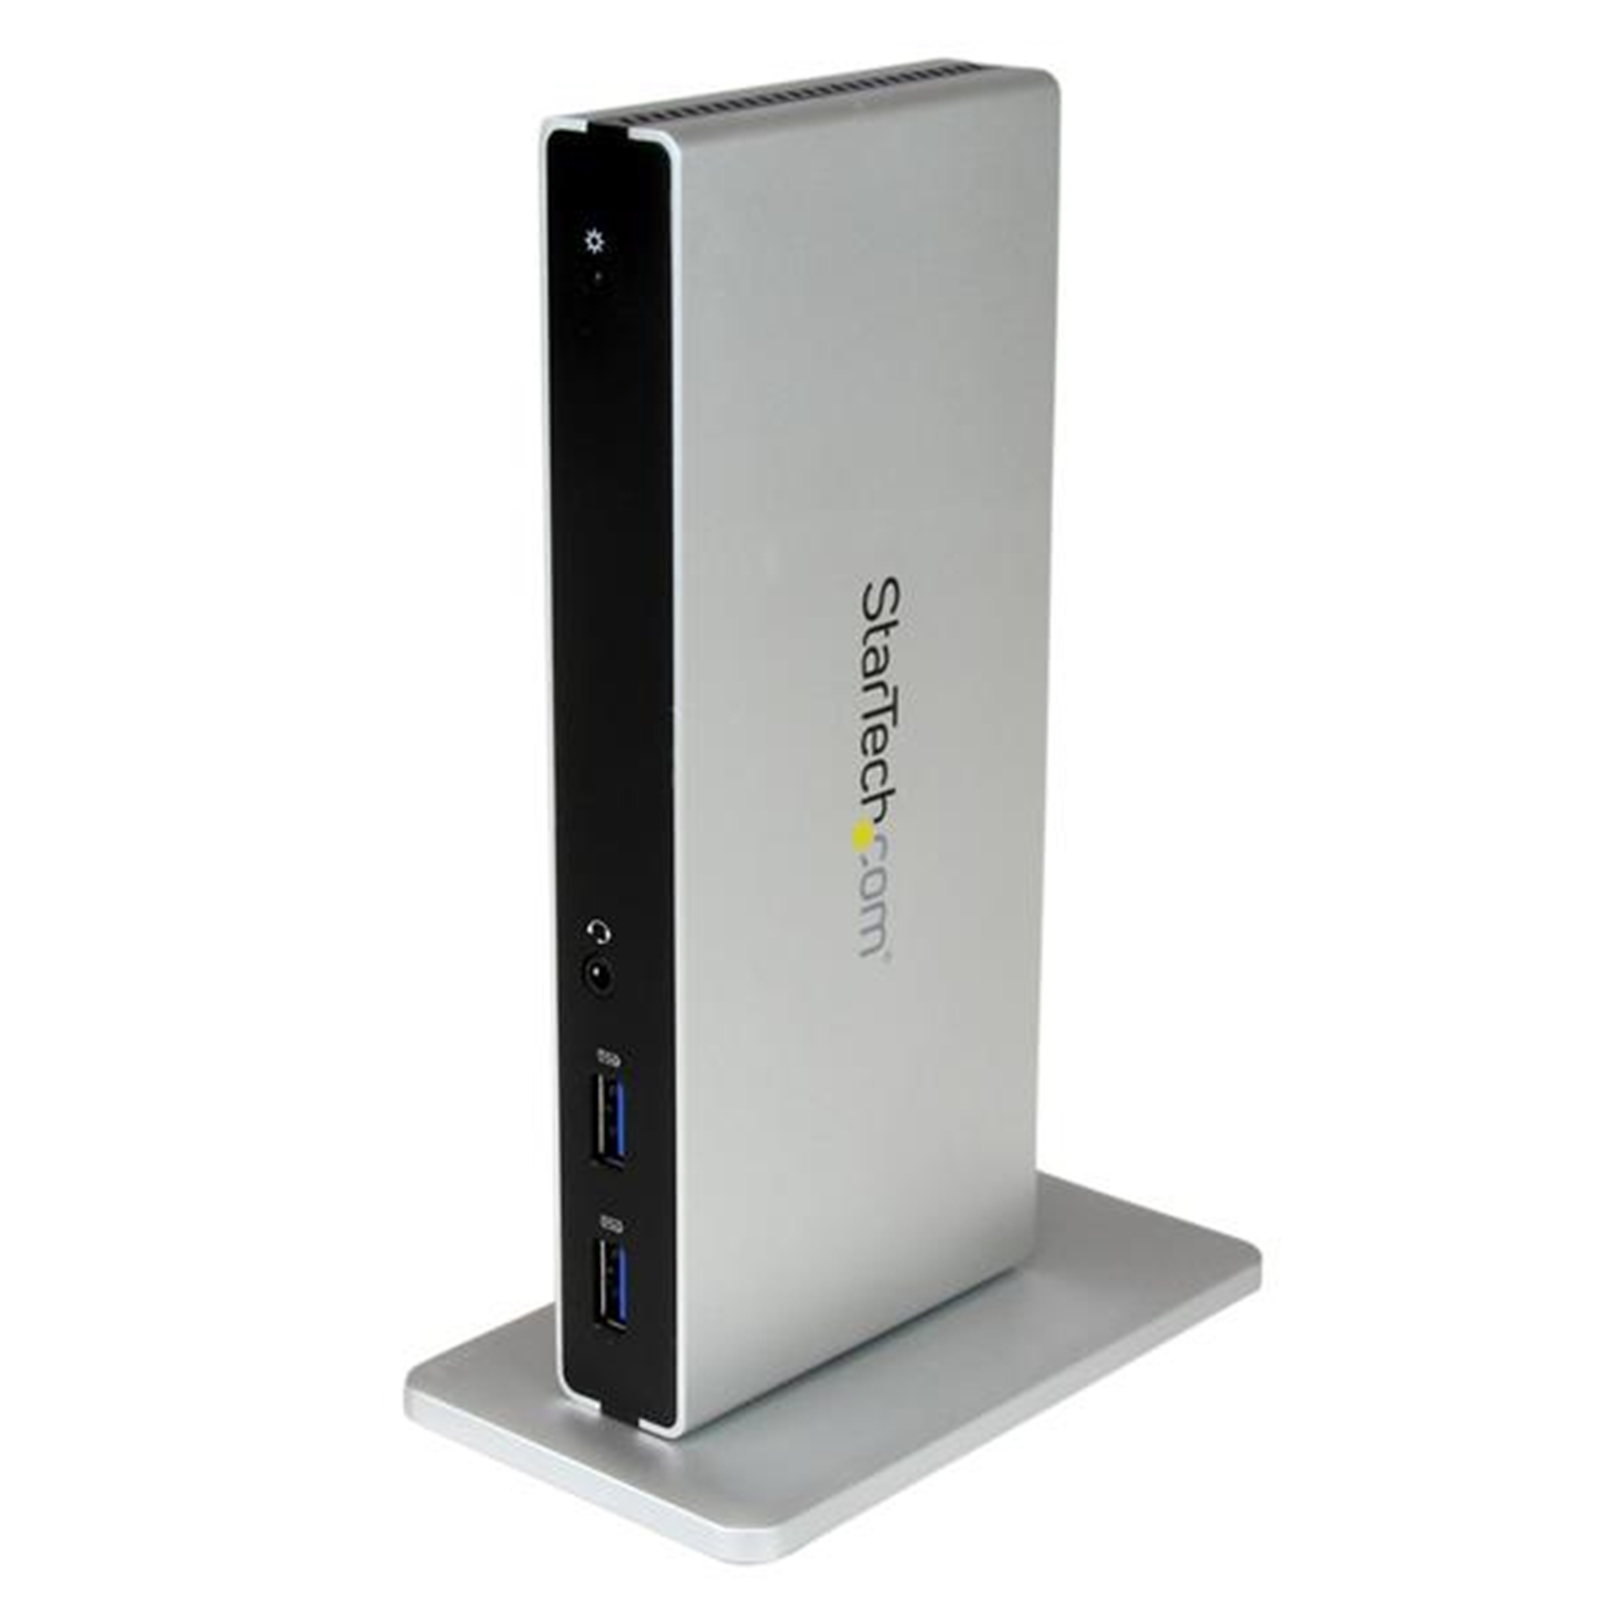 what is genesys logic usb2.0 card reader used for